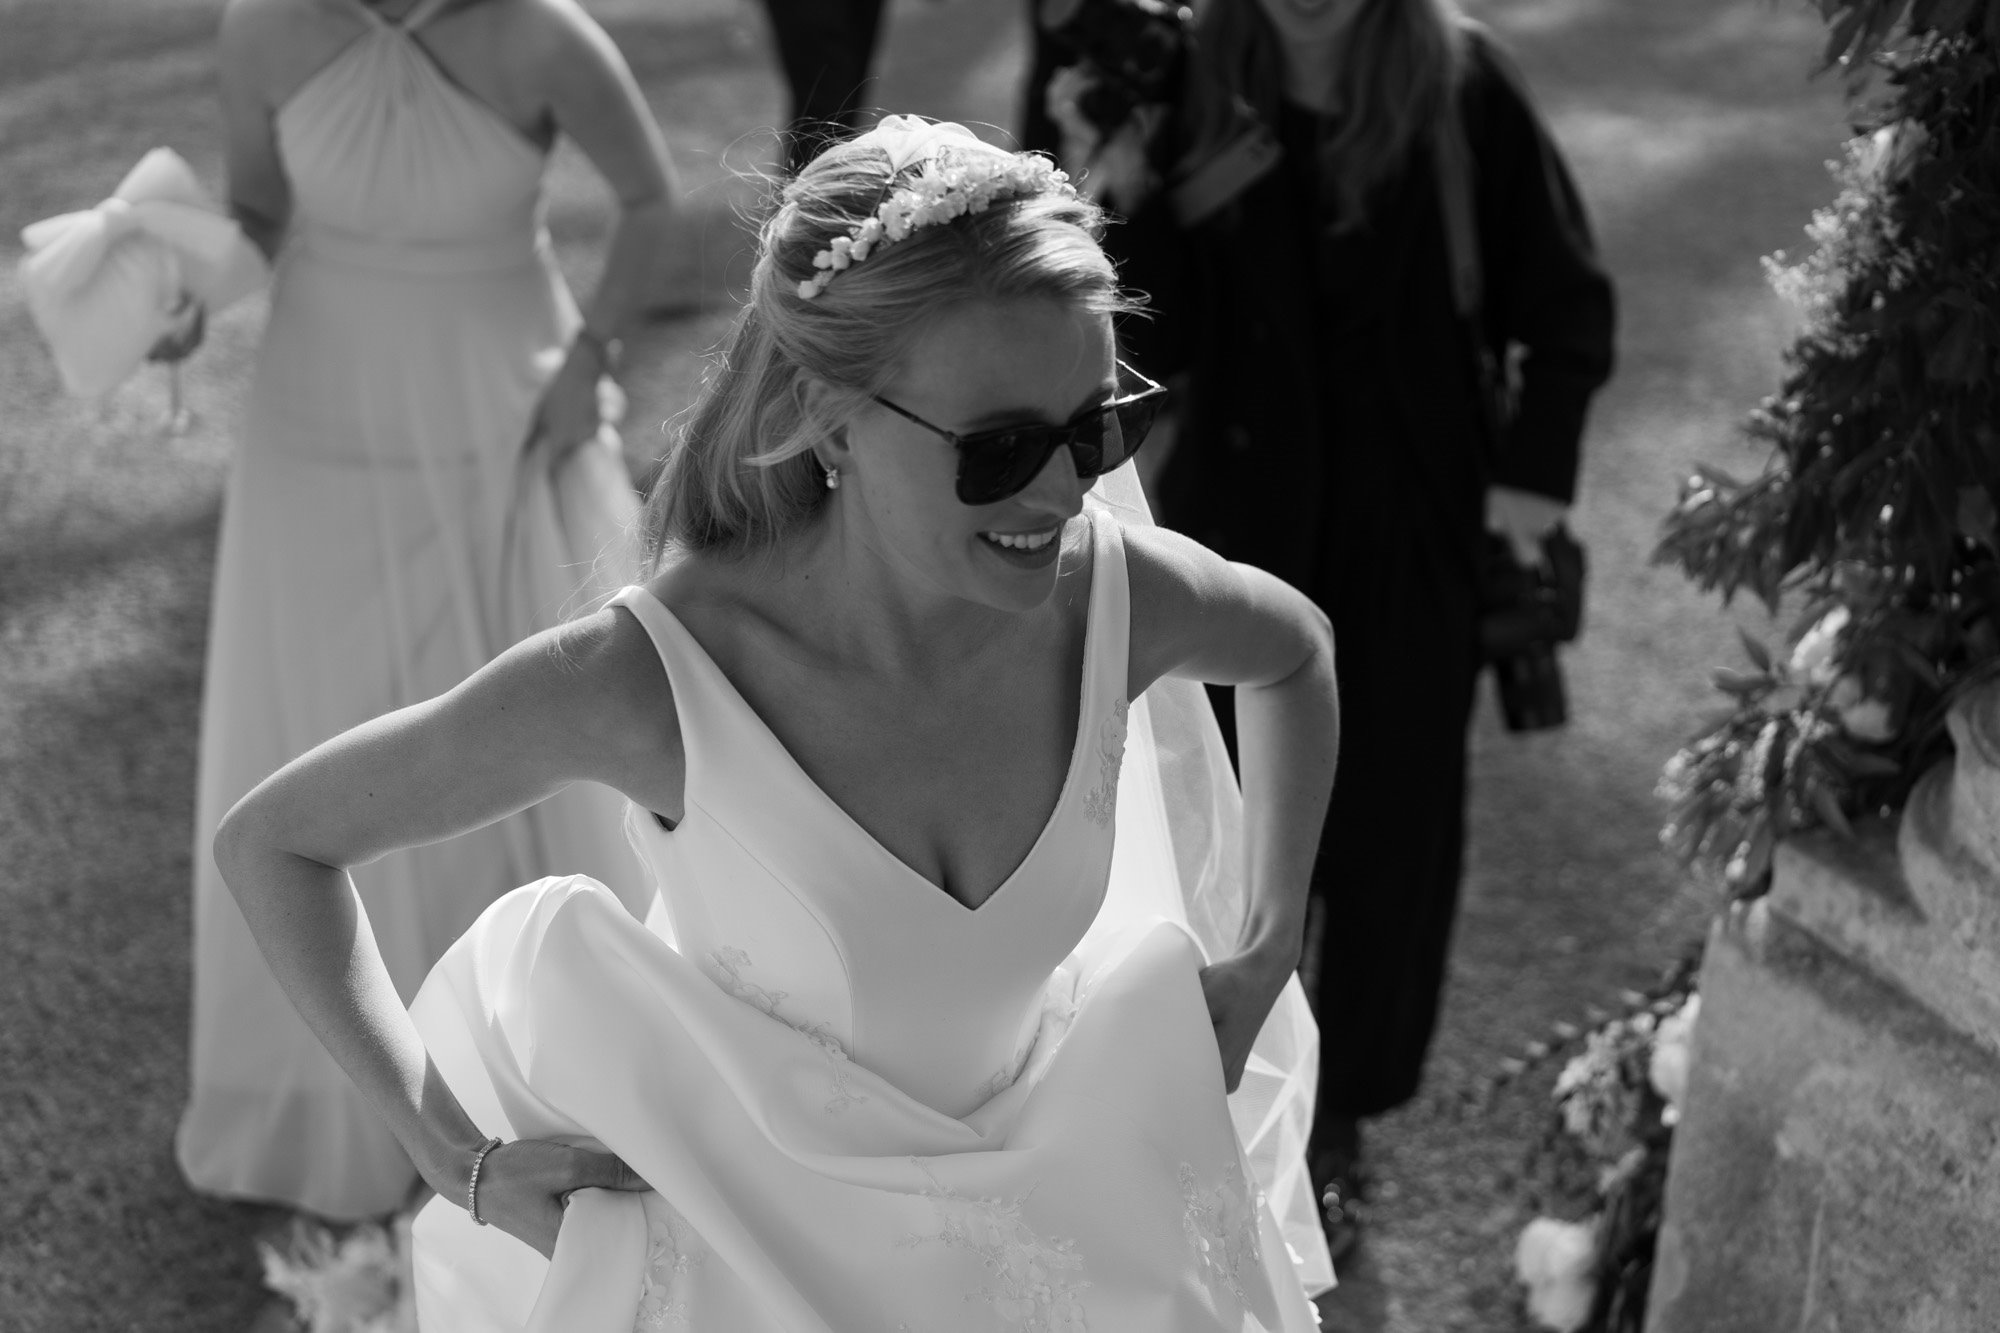 Cool modern bride in Ray Ban sunglasses, pearl bridal tiara, pearl necklace and pearl earrings lifts up the skirt of her princess wedding dress to walk up the steps of stately home wedding venue